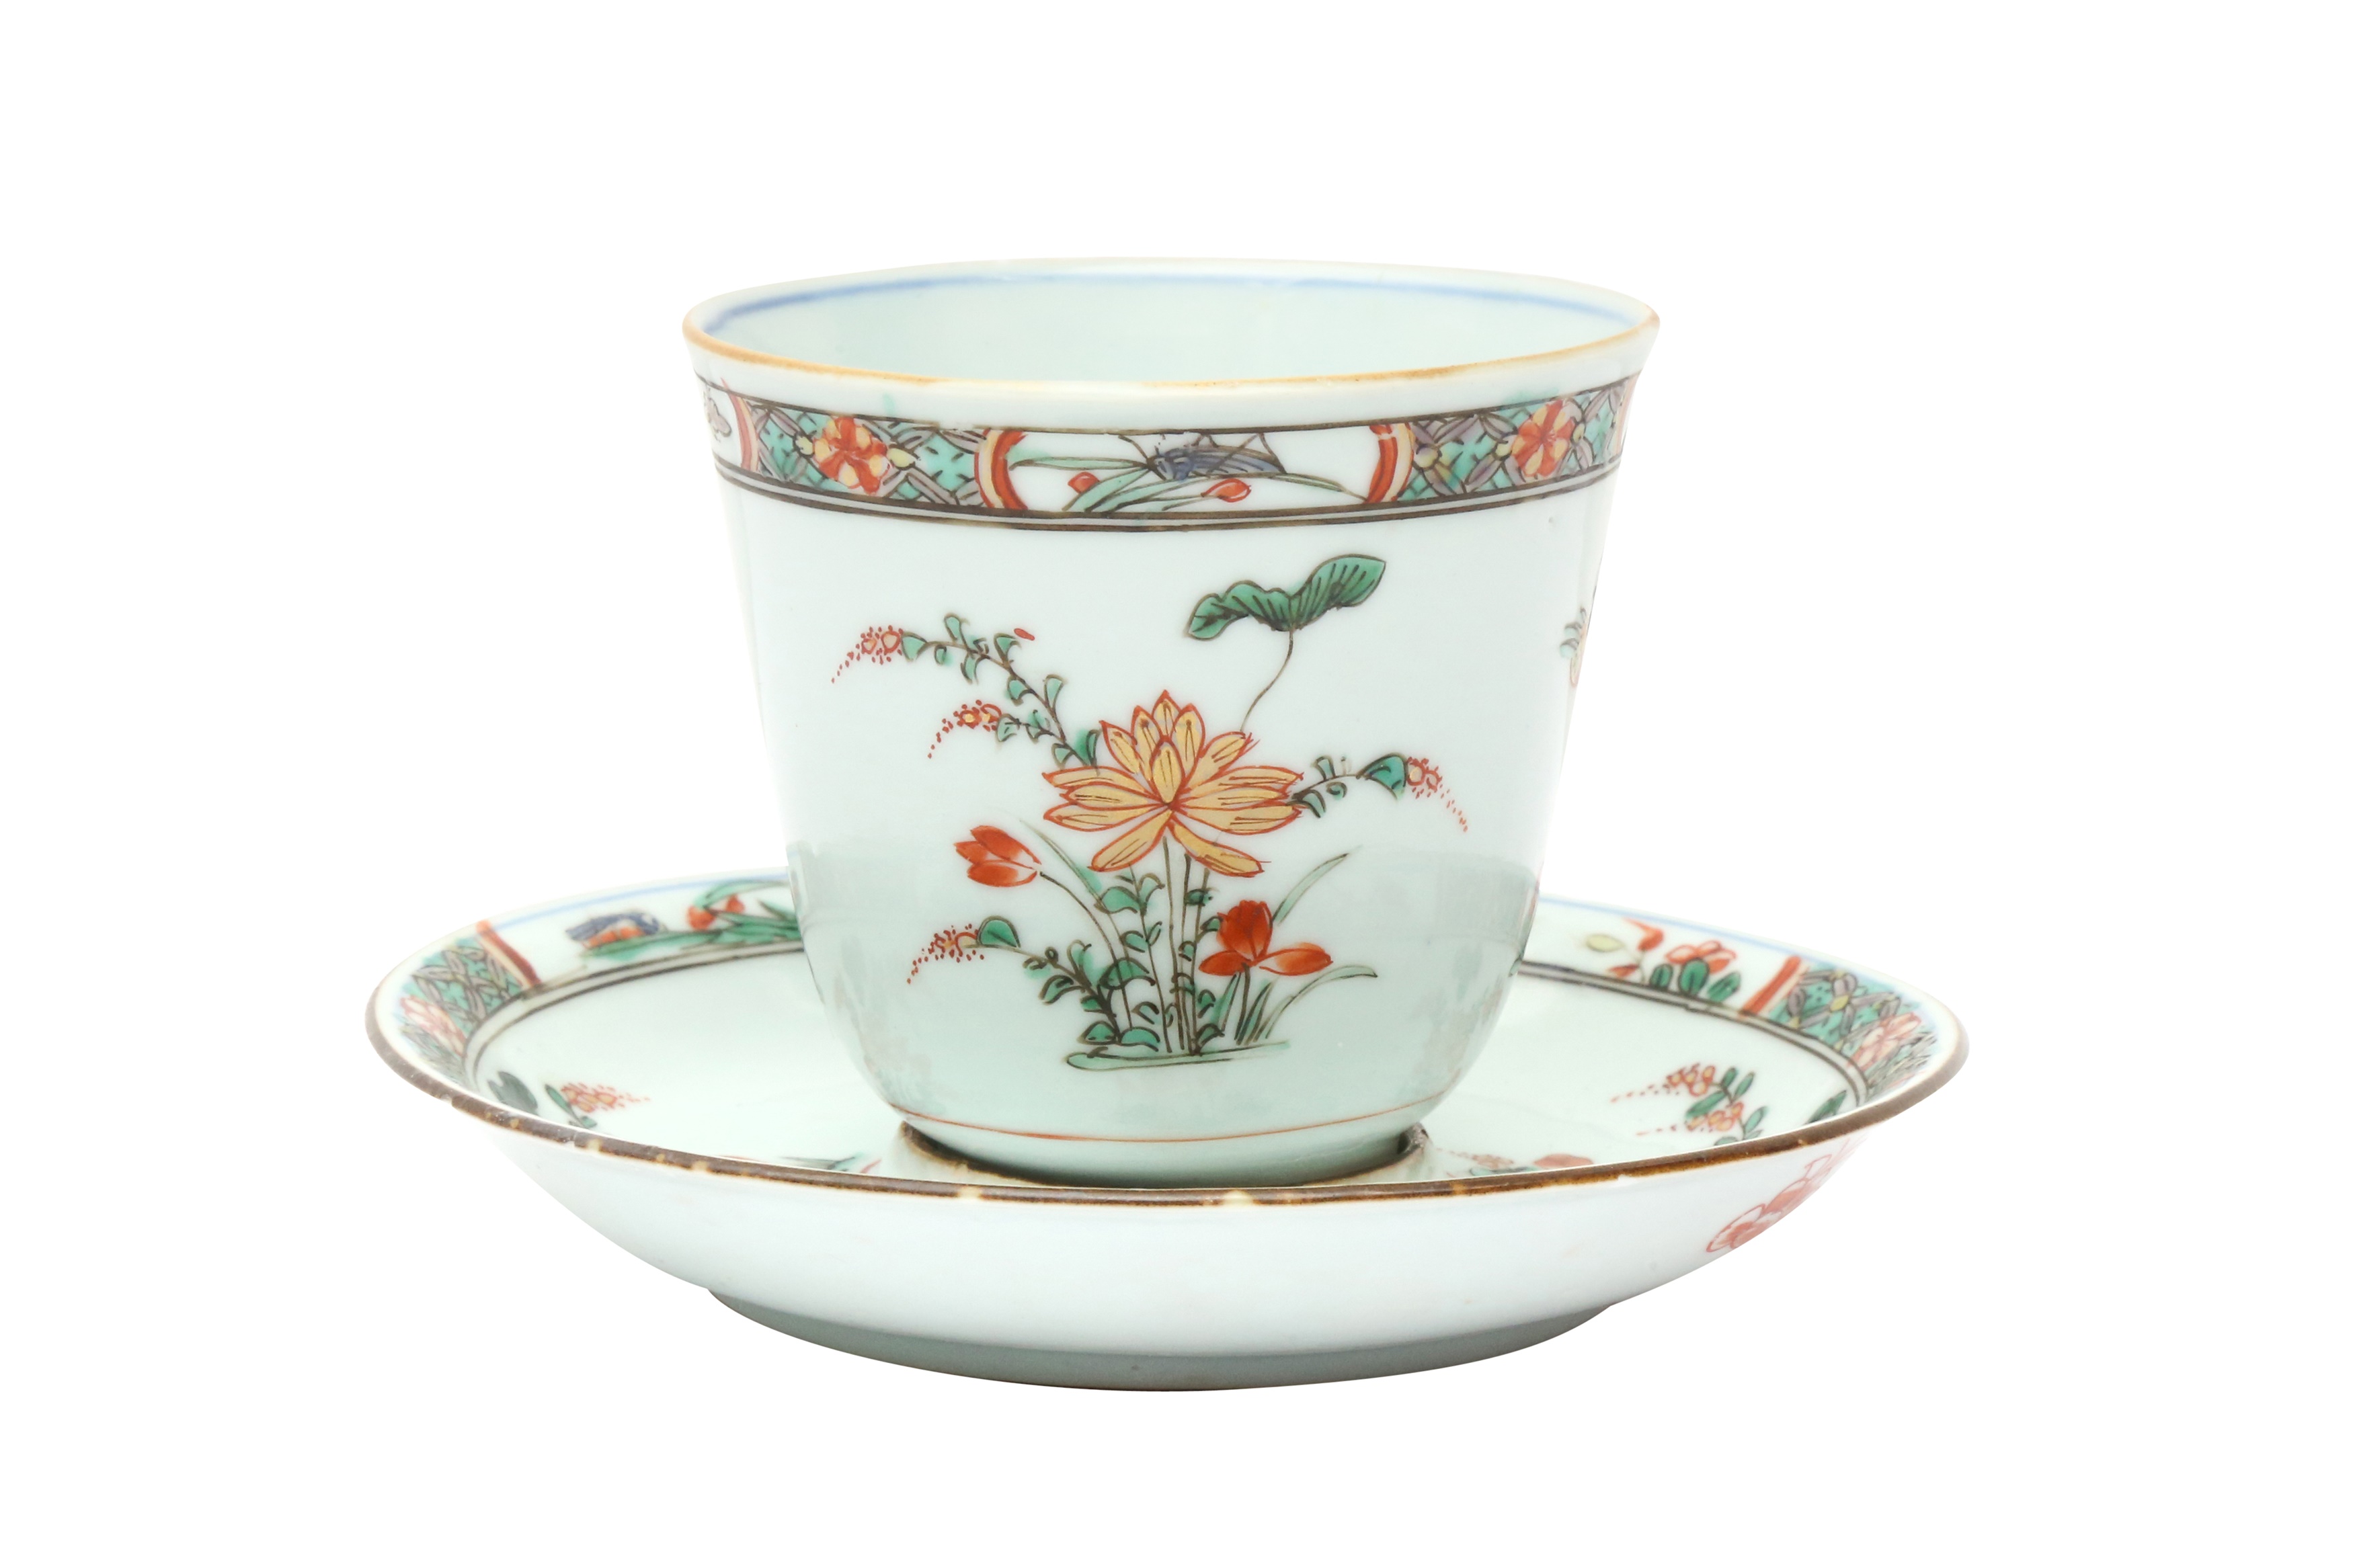 A CHINESE FAMILLE-VERTE CUP AND SAUCER 清康熙 五彩花鳥圖盃連盤